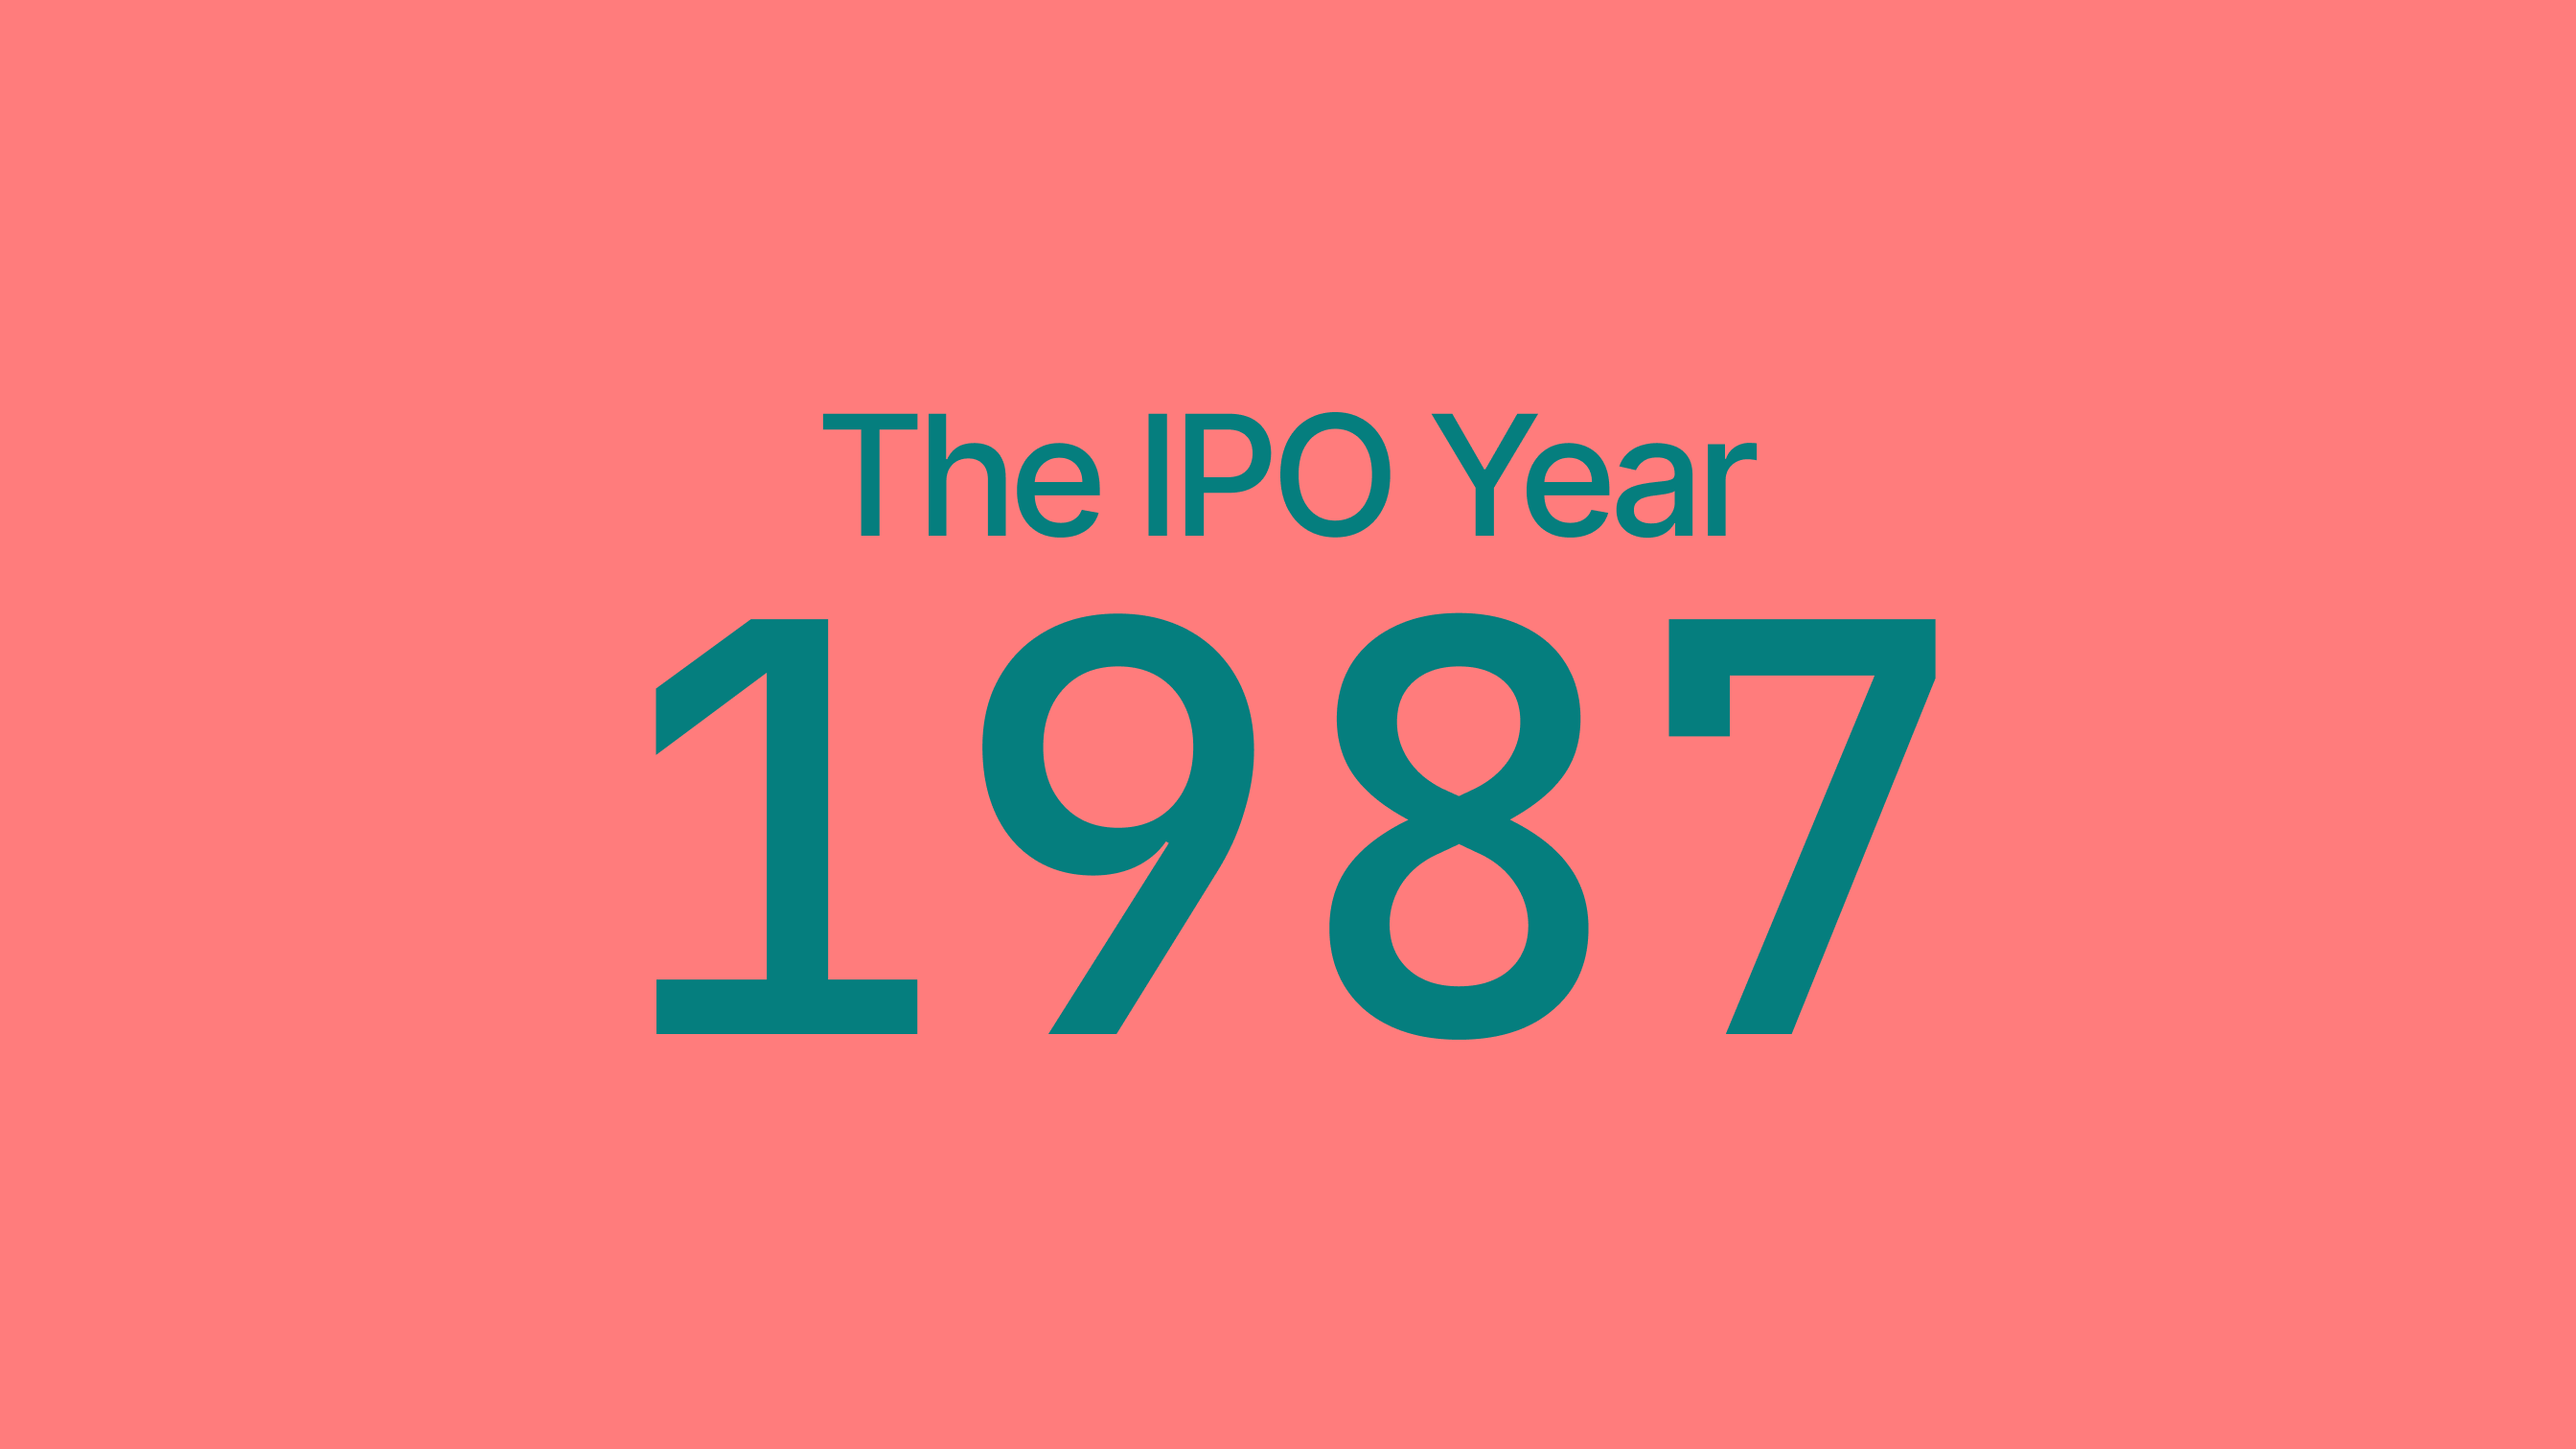 The IPO Year: 1987